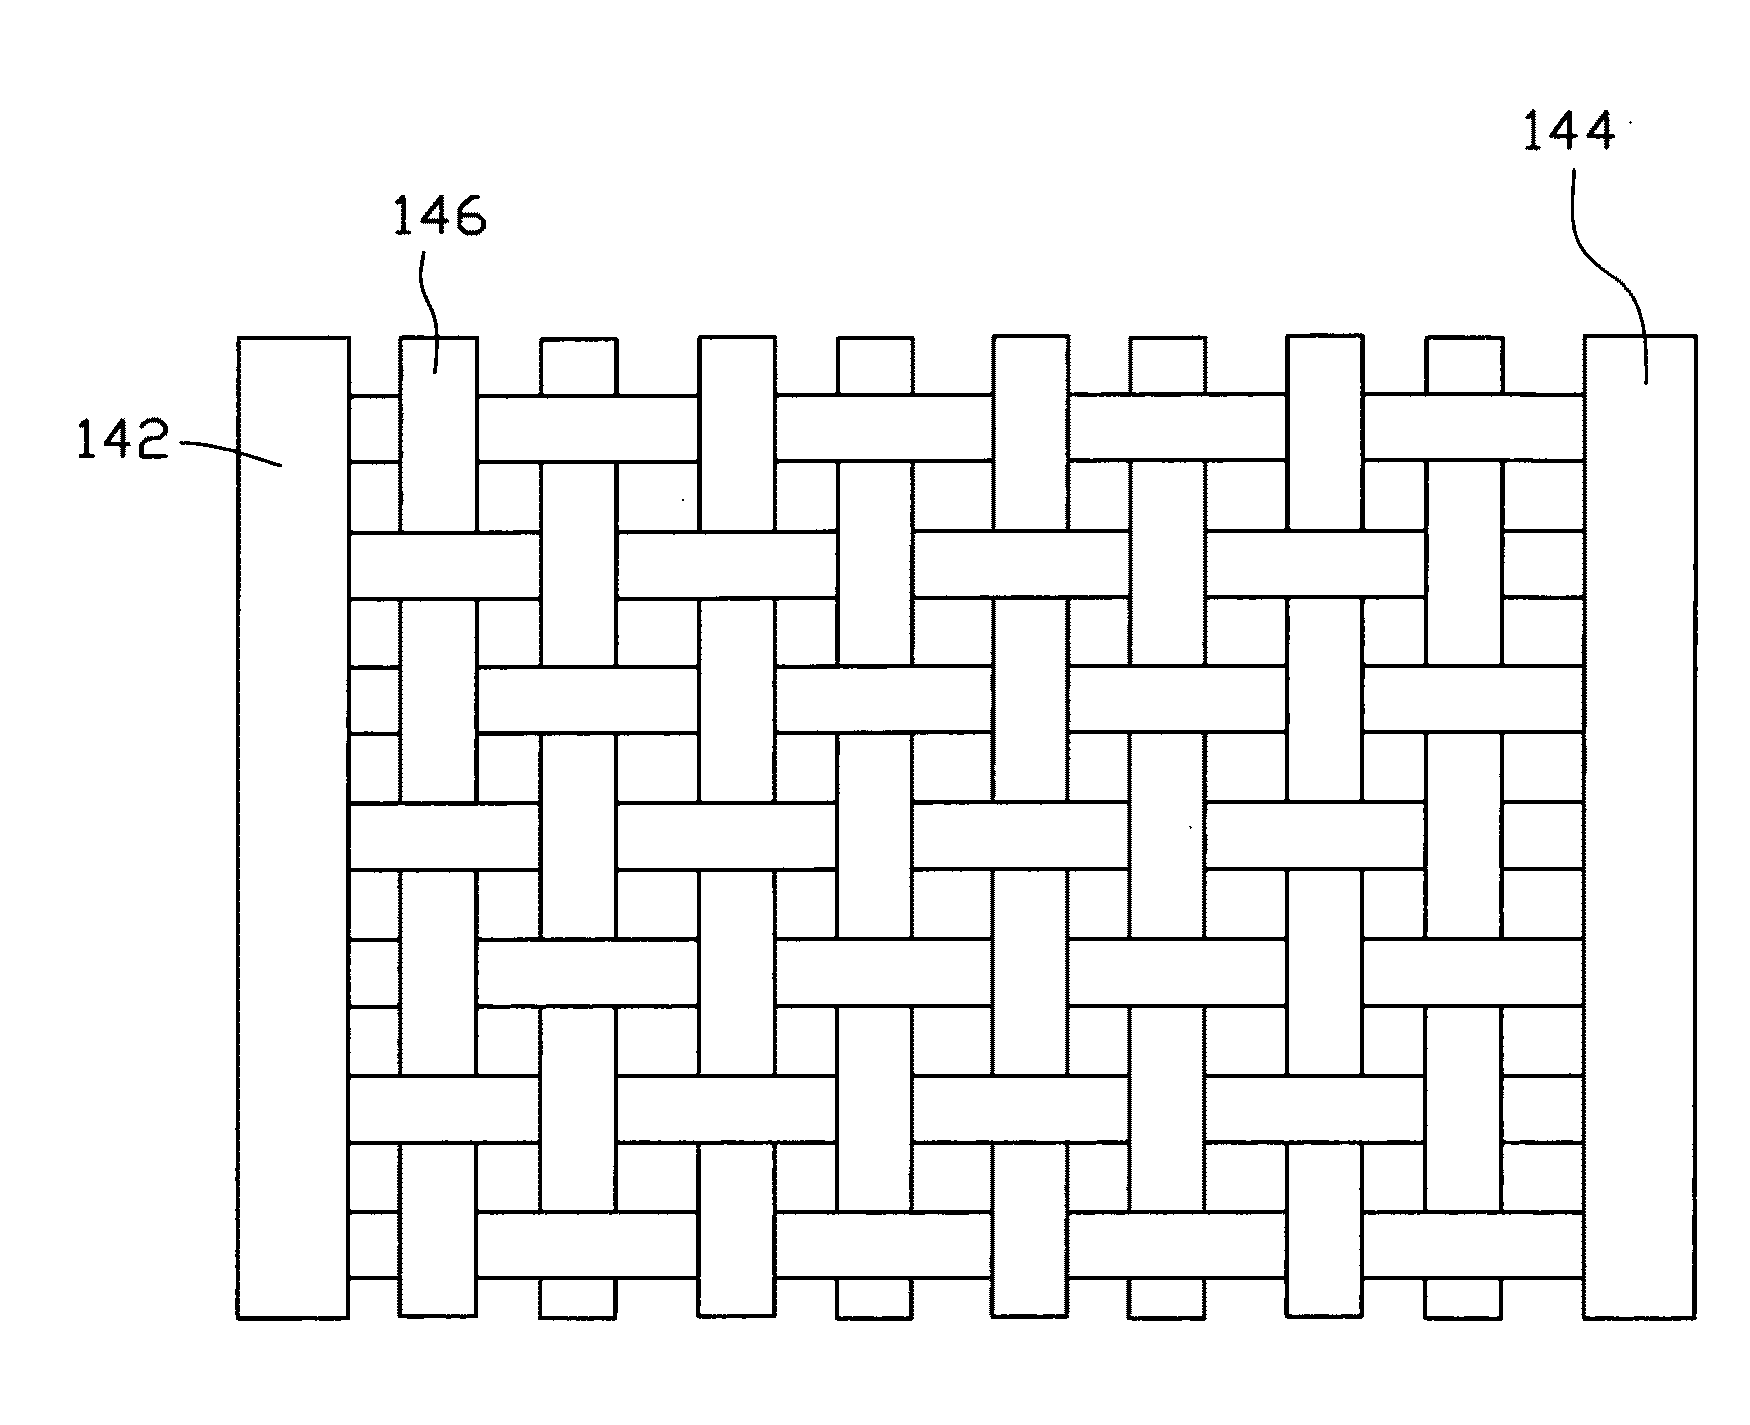 Method of causing the thermoacoustic effect